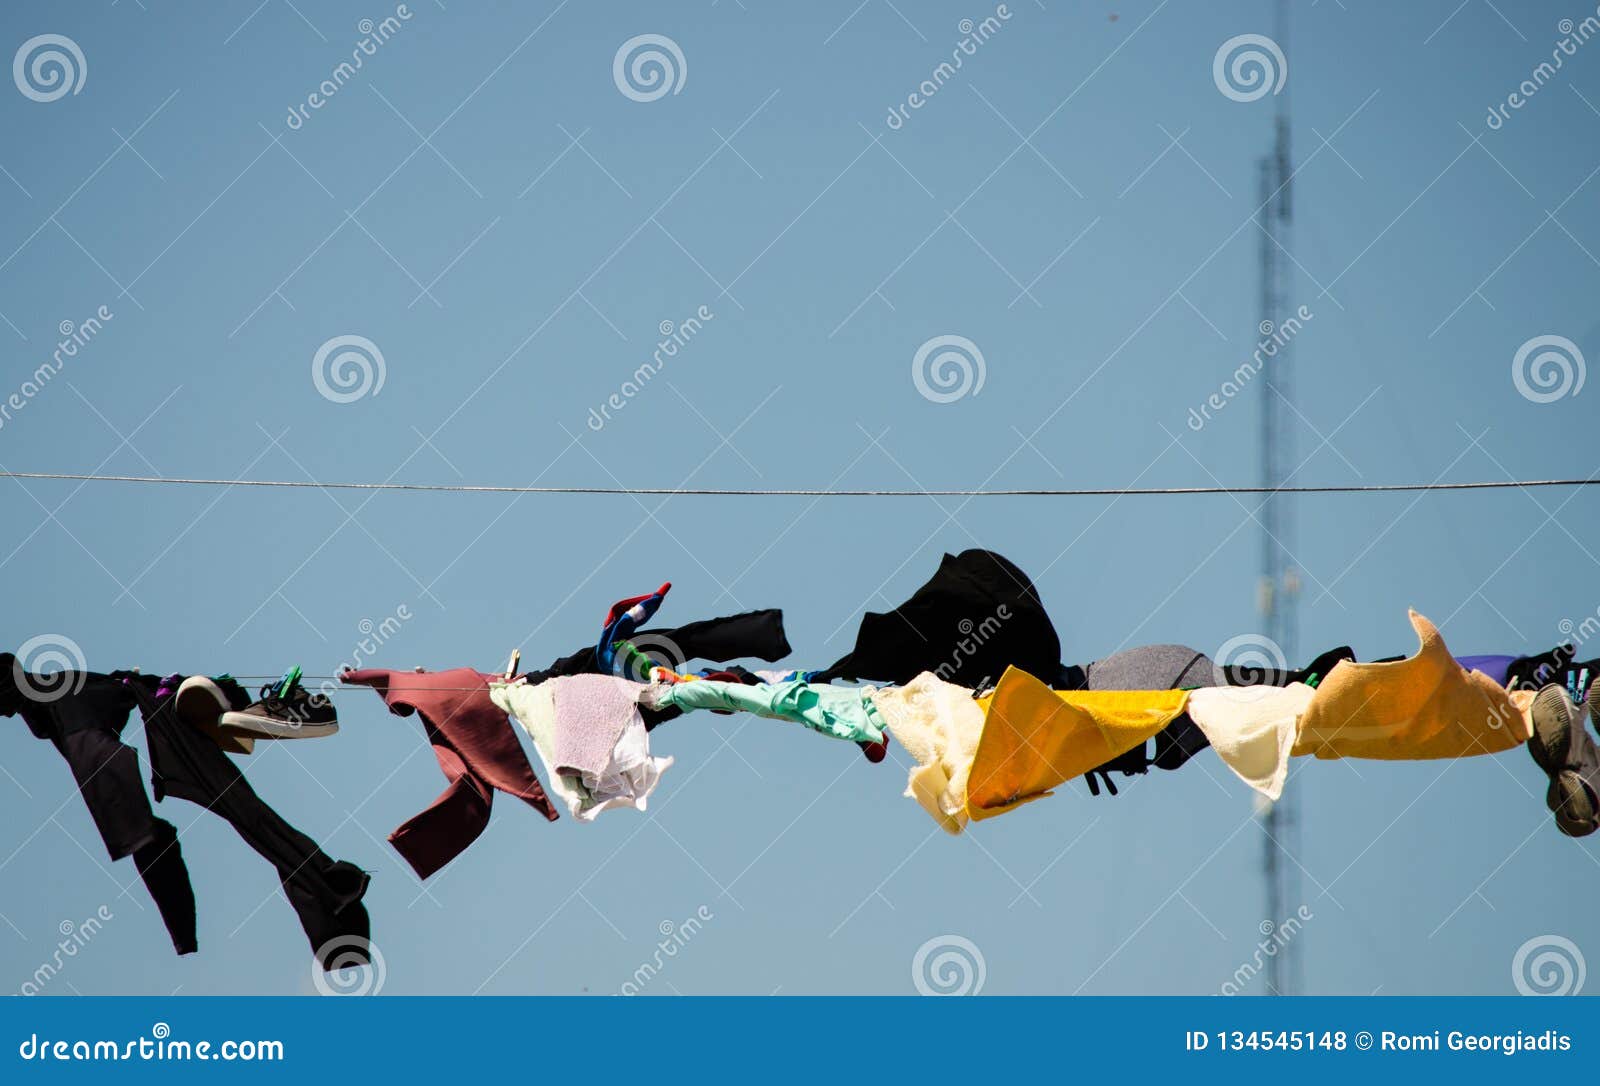 Clothes Hanging on a Windy Day Stock Photo - Image of yellow, close ...